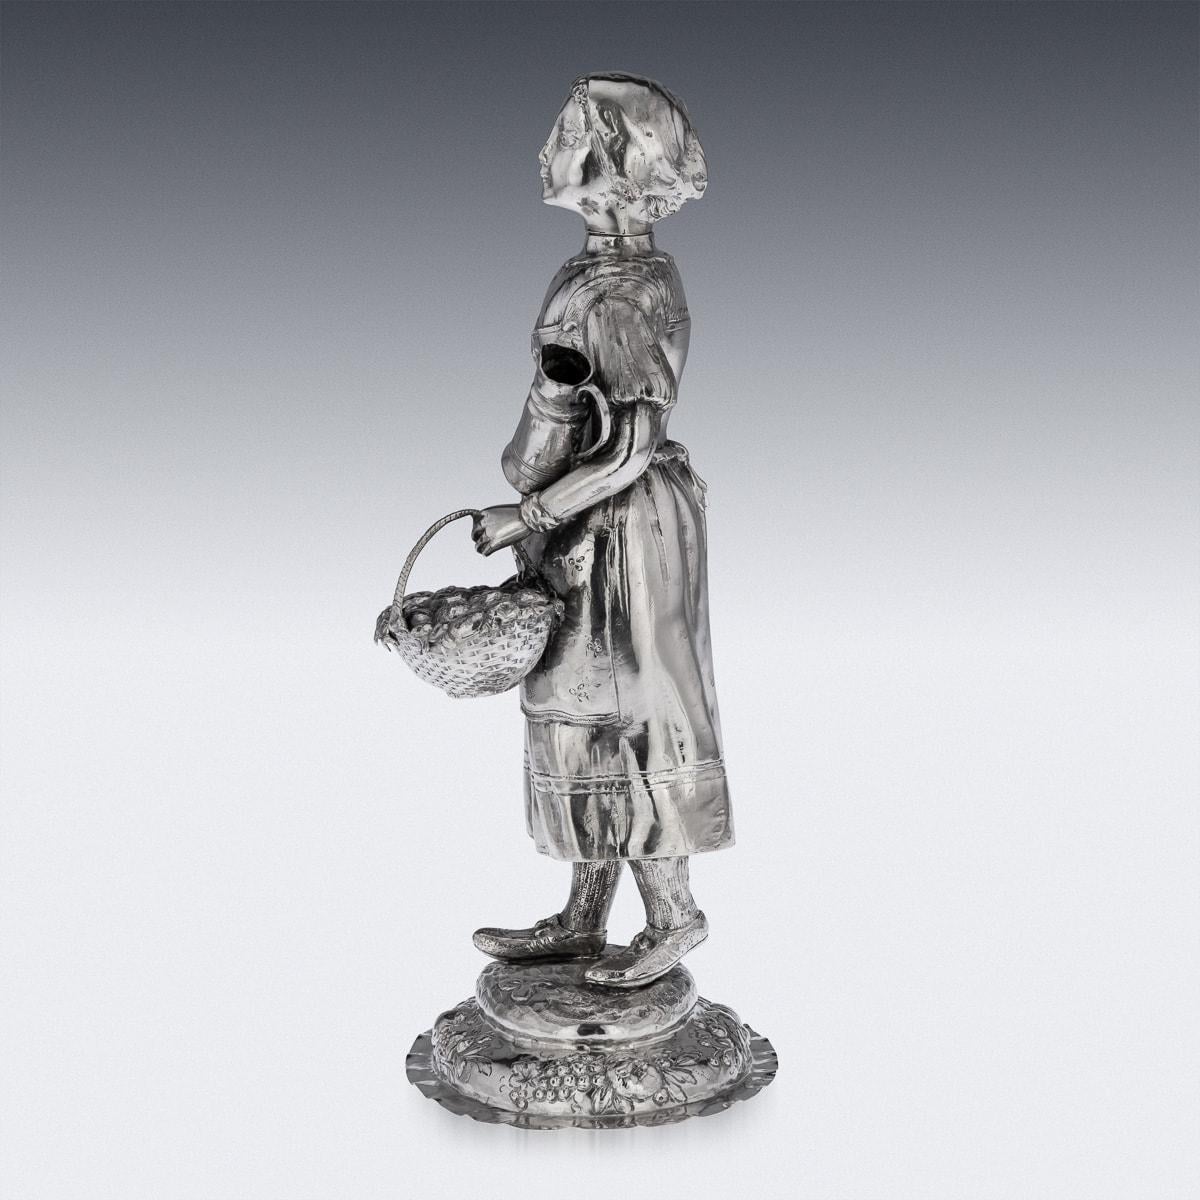 19th Century German Solid Silver Figure Of A Fruit Seller, c.1880 For Sale 1